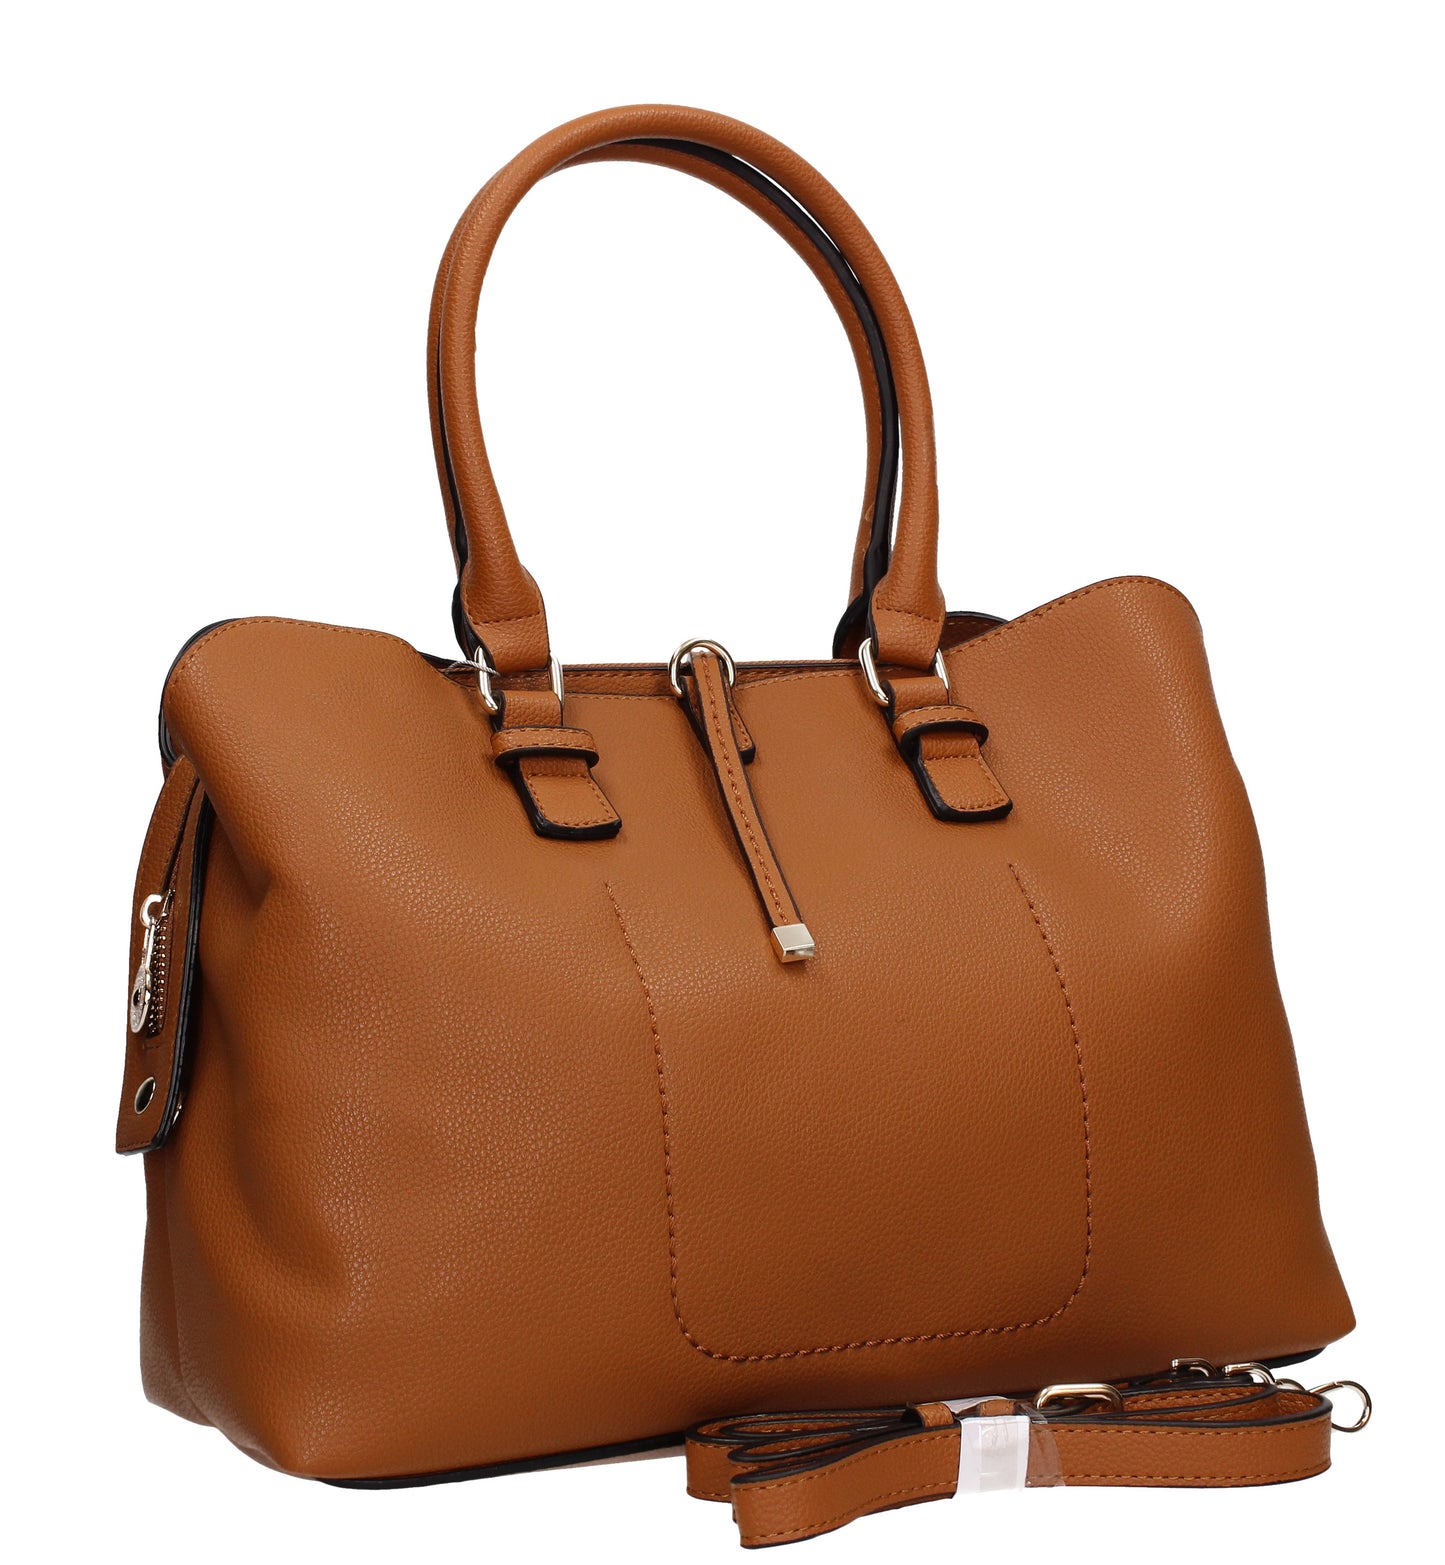 Buy your Leia Handbag Tan Brown Today! Buy with confidence from Swankyswans